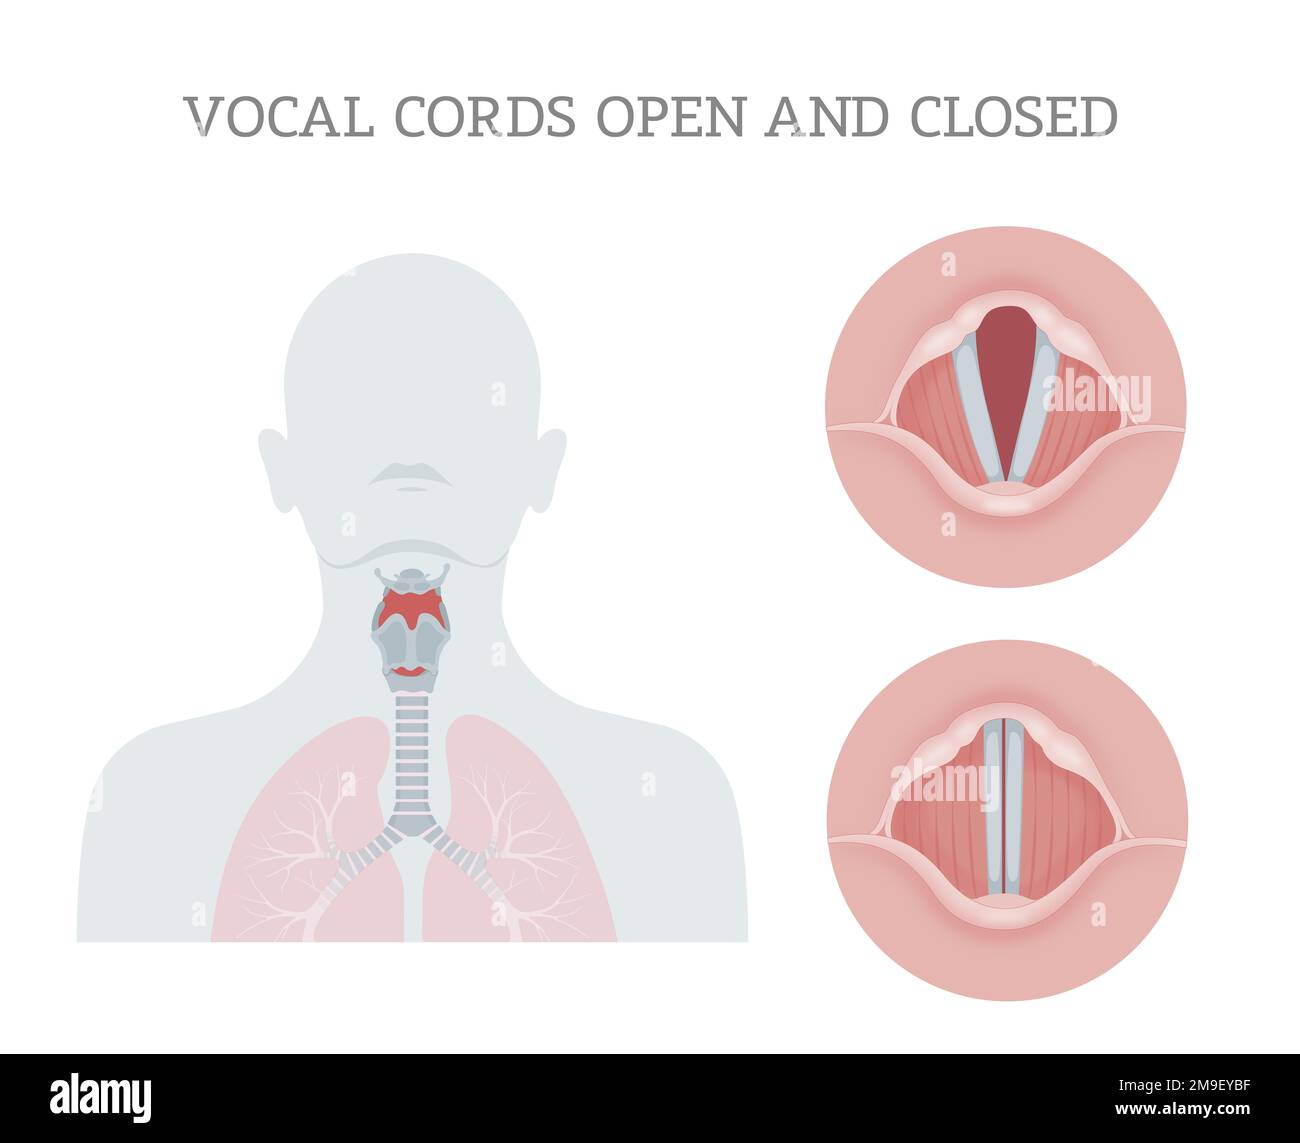 Vocal cords open and closed Stock Photo